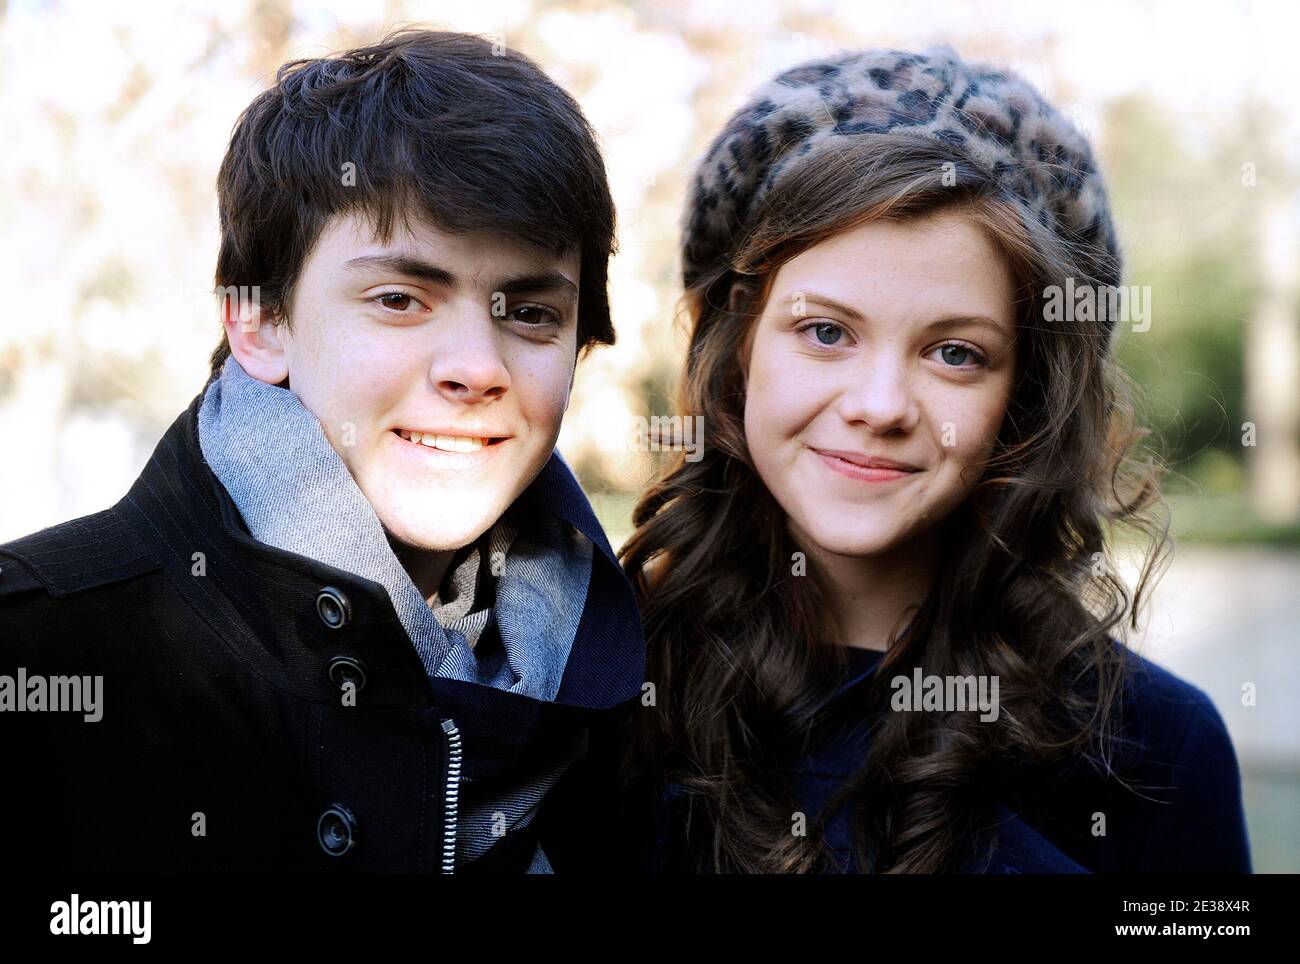 Actors Georgie Henley and Skandar Keynes, who star in the upcoming holiday motion picture event 'The Chronicles Of Narnia: The Voyage of the Dawn Treader' pose for a photo during the Smithsonian's National Zoo Lion Cub naming ceremony at Smithsonian National Zoological Park in Washington, DC, USA on December 9, 2010. Photo by Olivier Douliery /ABACAPRESS.COM Stock Photo